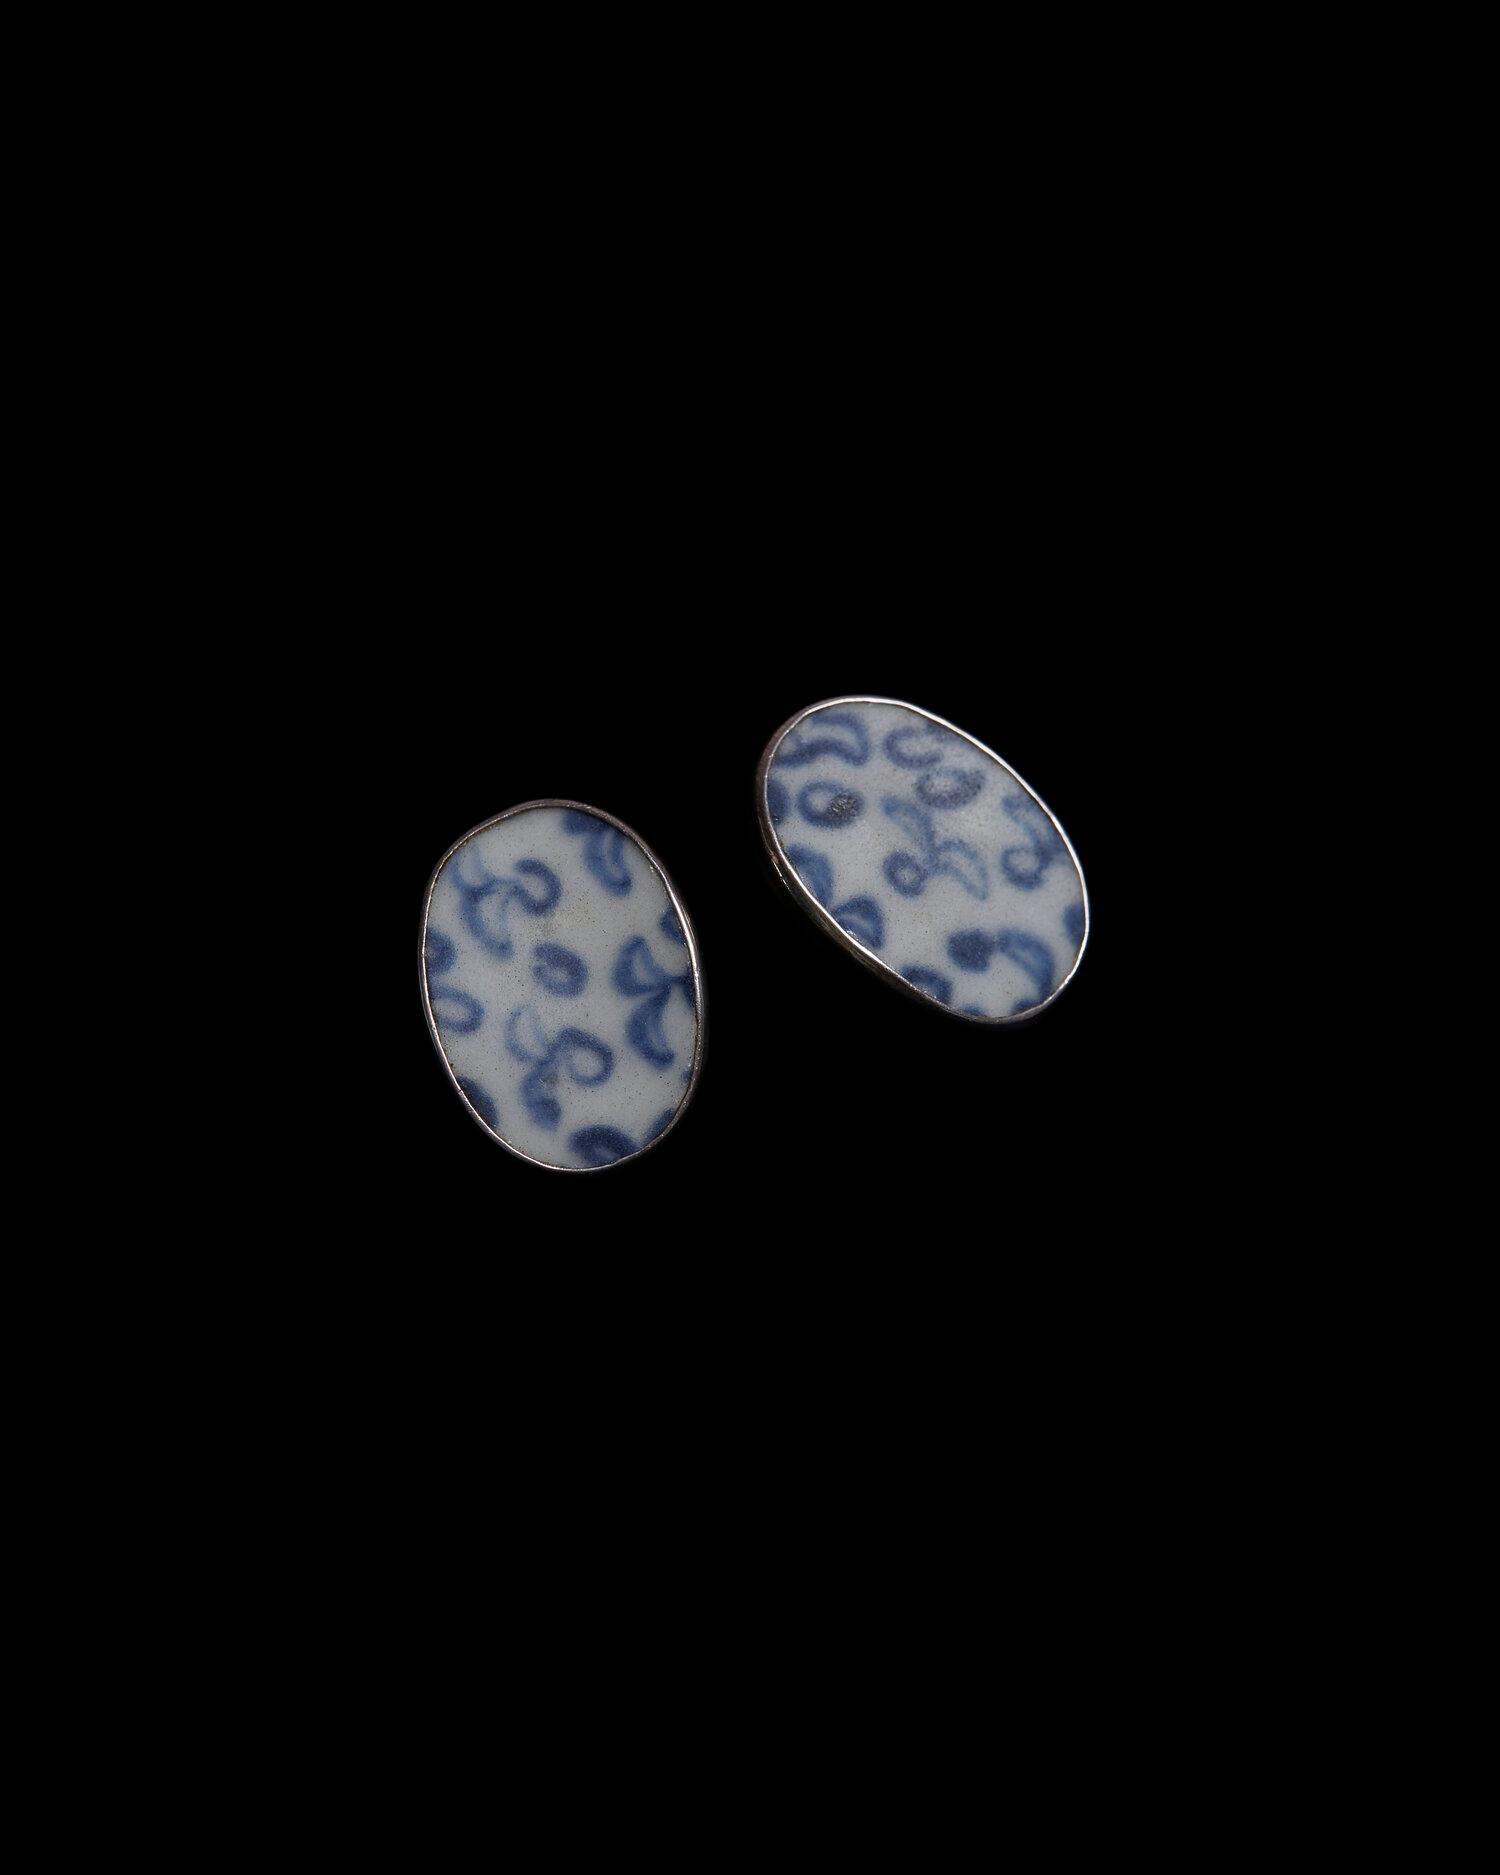 Blue and White Pottery Pieces set in Sterling Silver
Handmade by an unknown artist
Unsigned
Each earring measuring 1 x 0.6 x 0.125 inches
Each weighing 3.5 grams
Pierced backs
In excellent condition